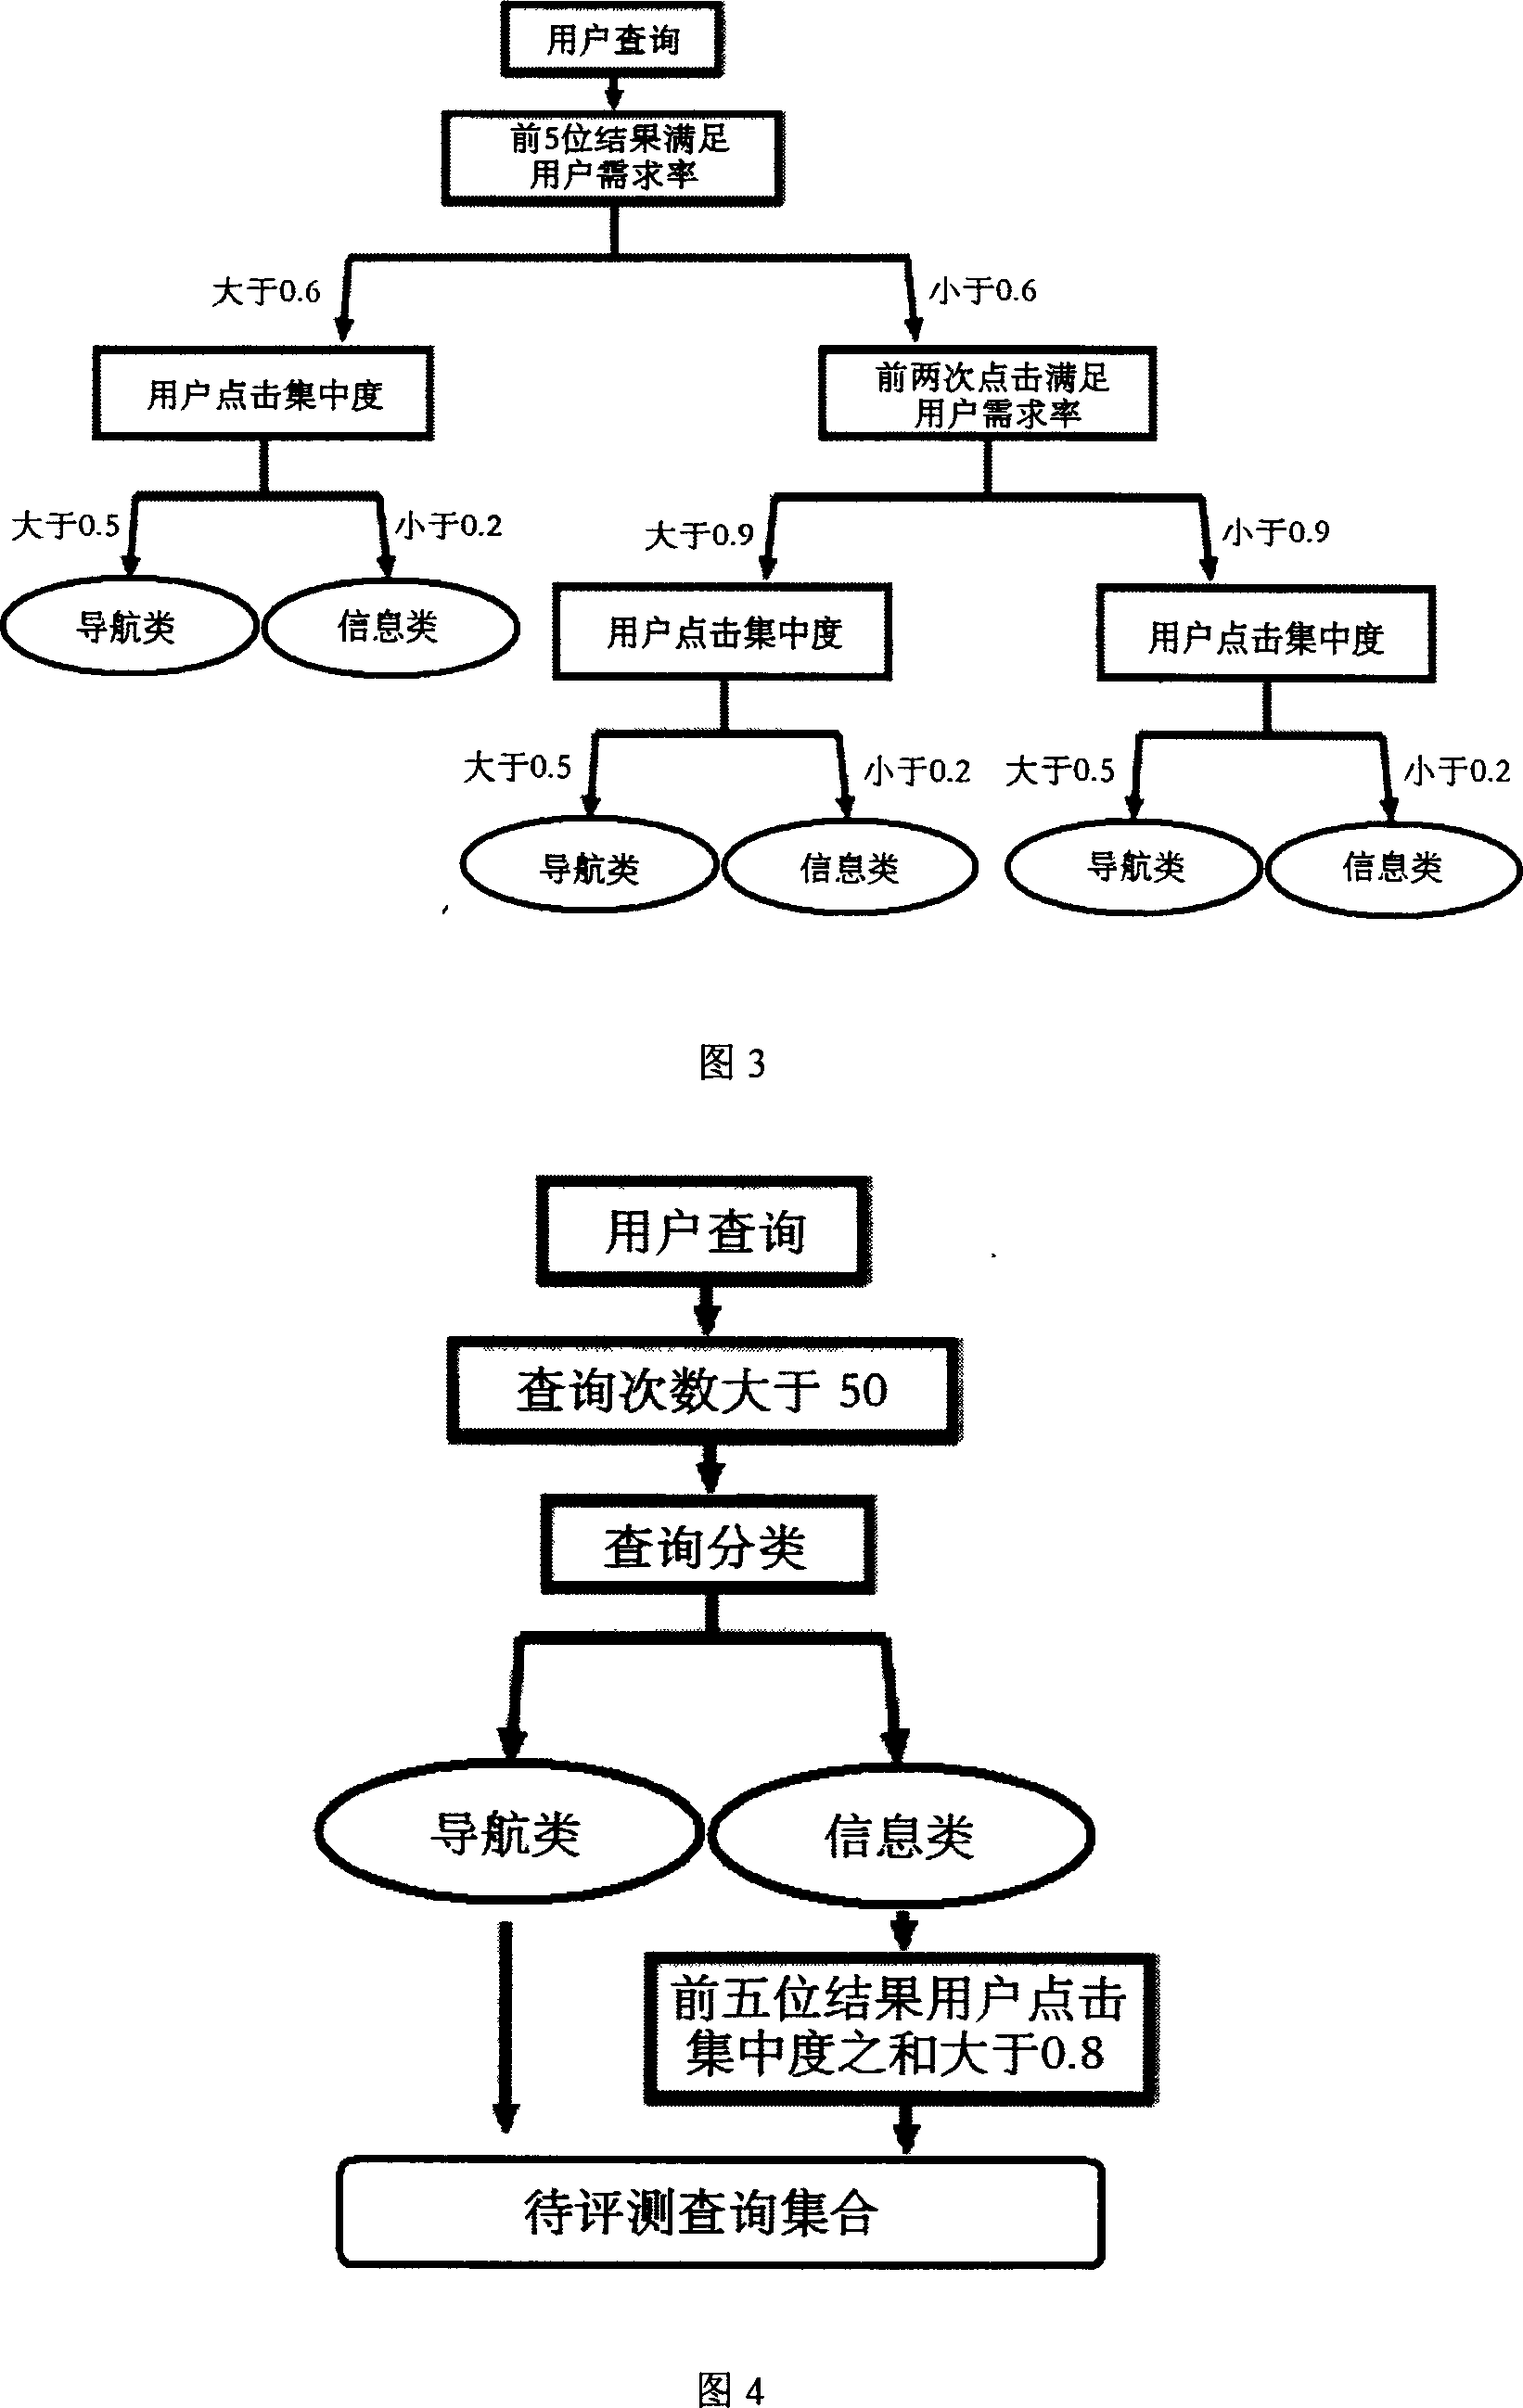 Automatization processing method of rating of merit of search engine